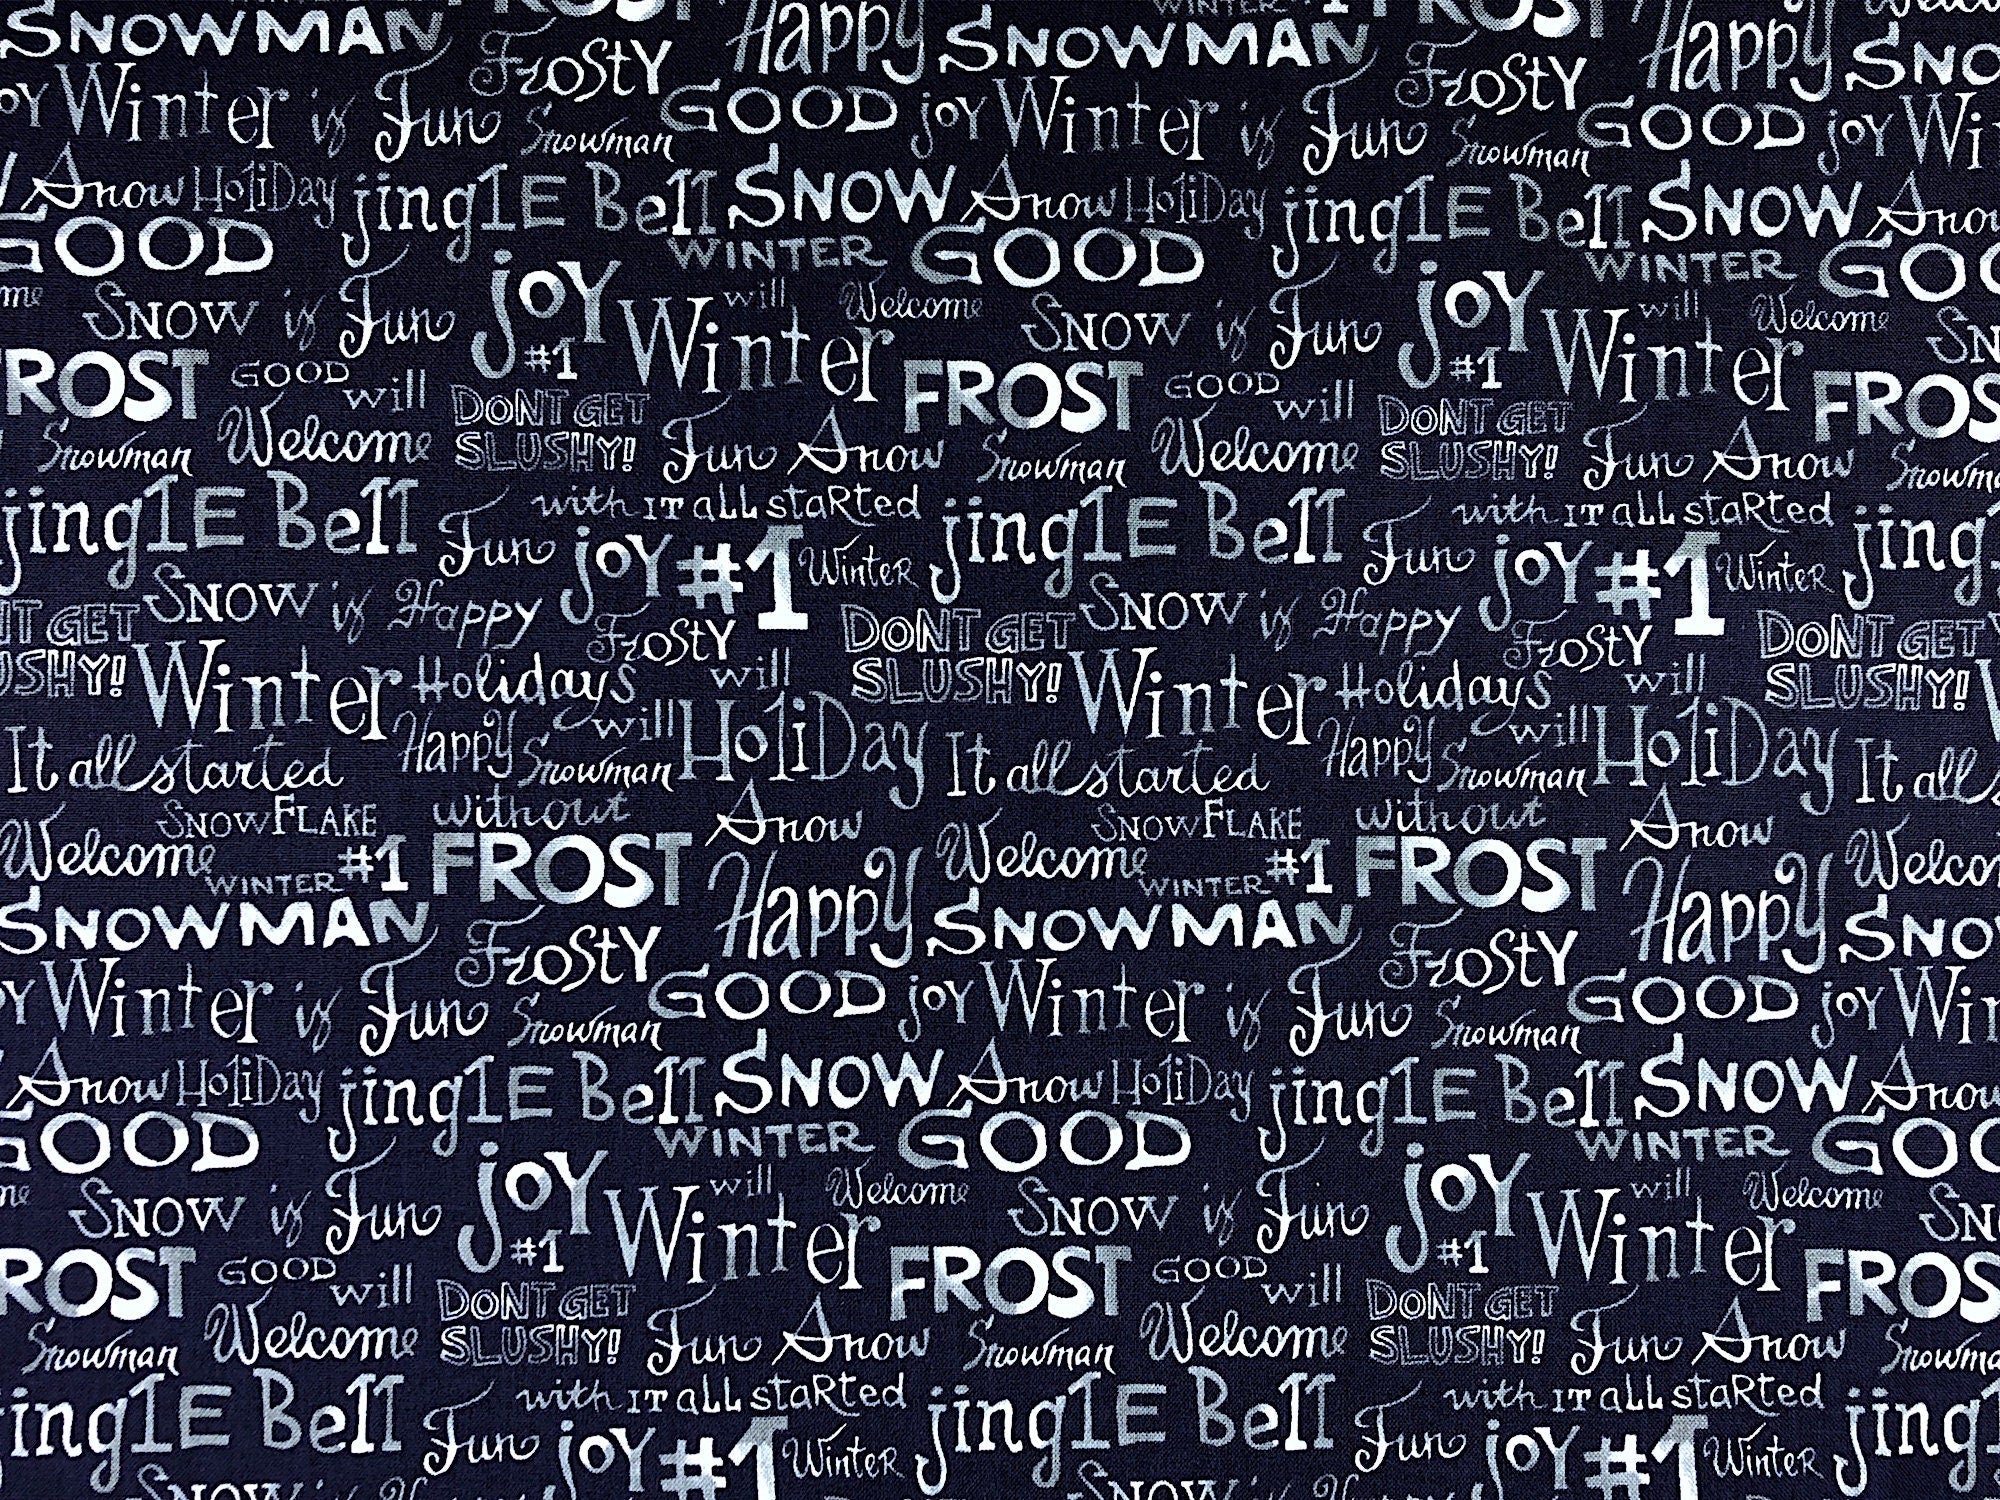 This fabric is covered with rows of winter sayings. Some of the words are: Joy, Winter, Frost, Jingle Bells, Fun, Snowman, Welcome and more